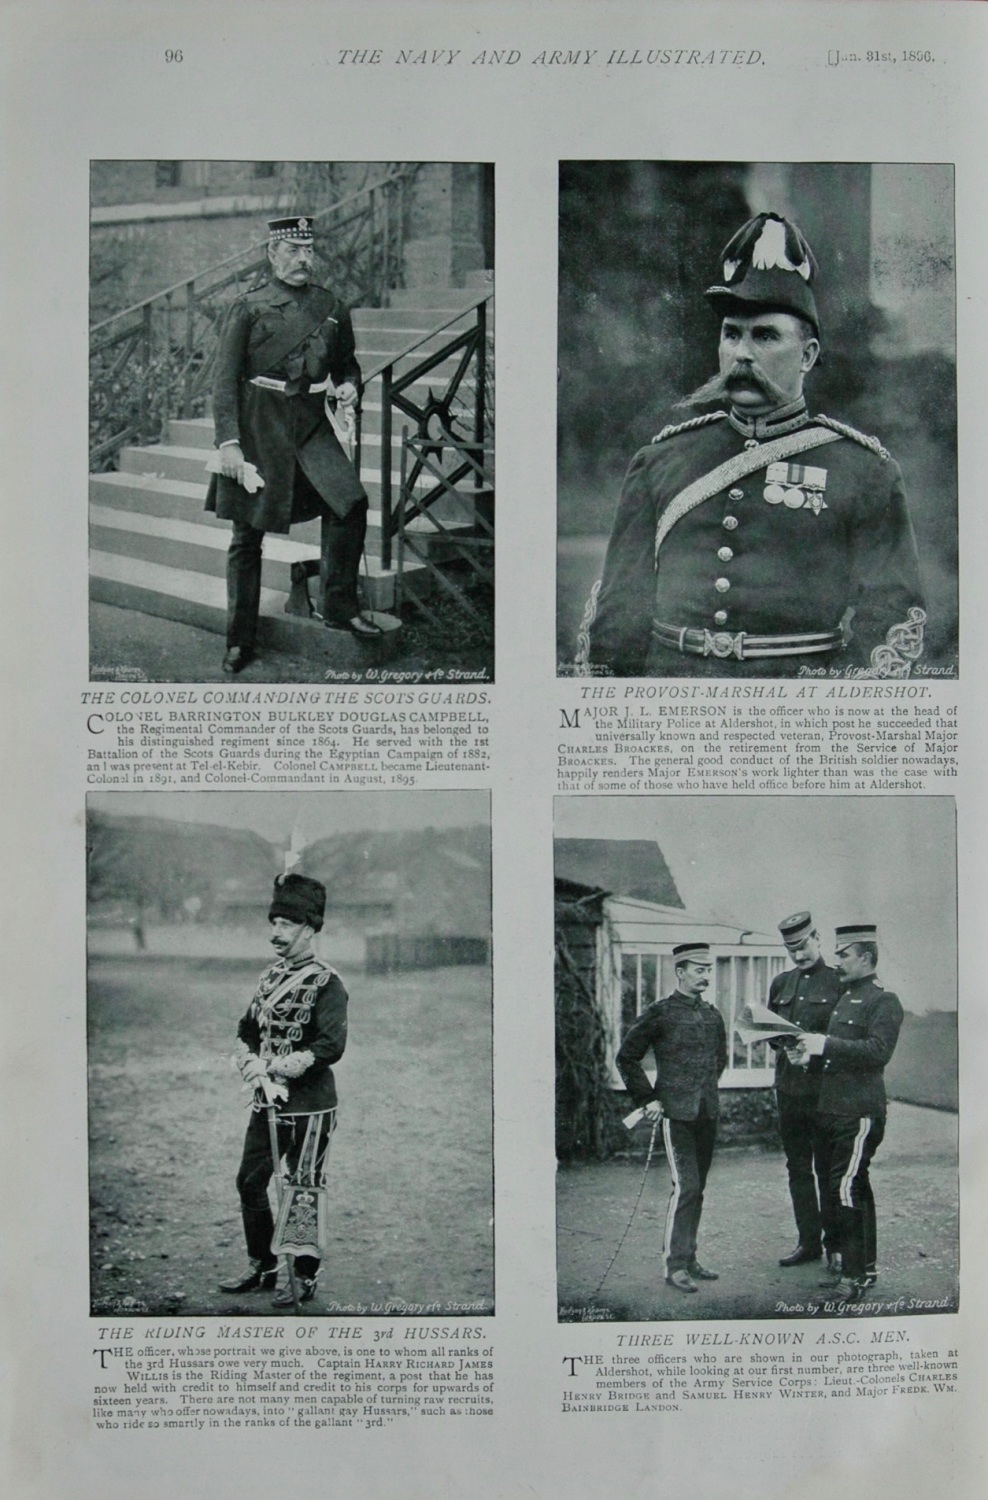 Original page from Navy & Army Illustrated 1896